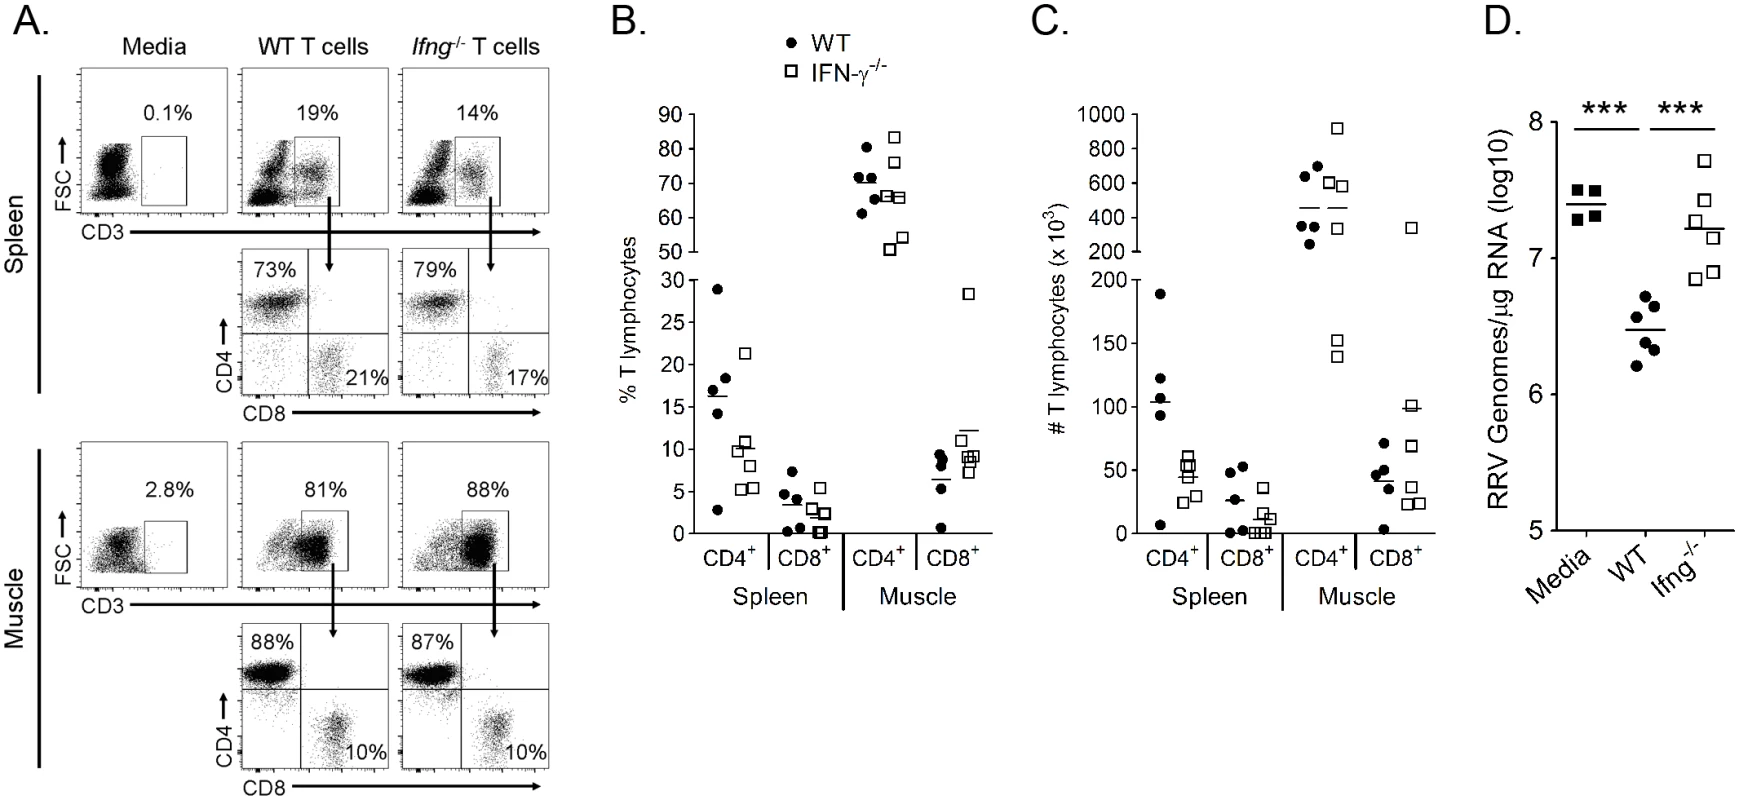 IFN-γ expression by T cells is required to control RRV infection in <i>Rag1</i><sup>-/-</sup> mice.